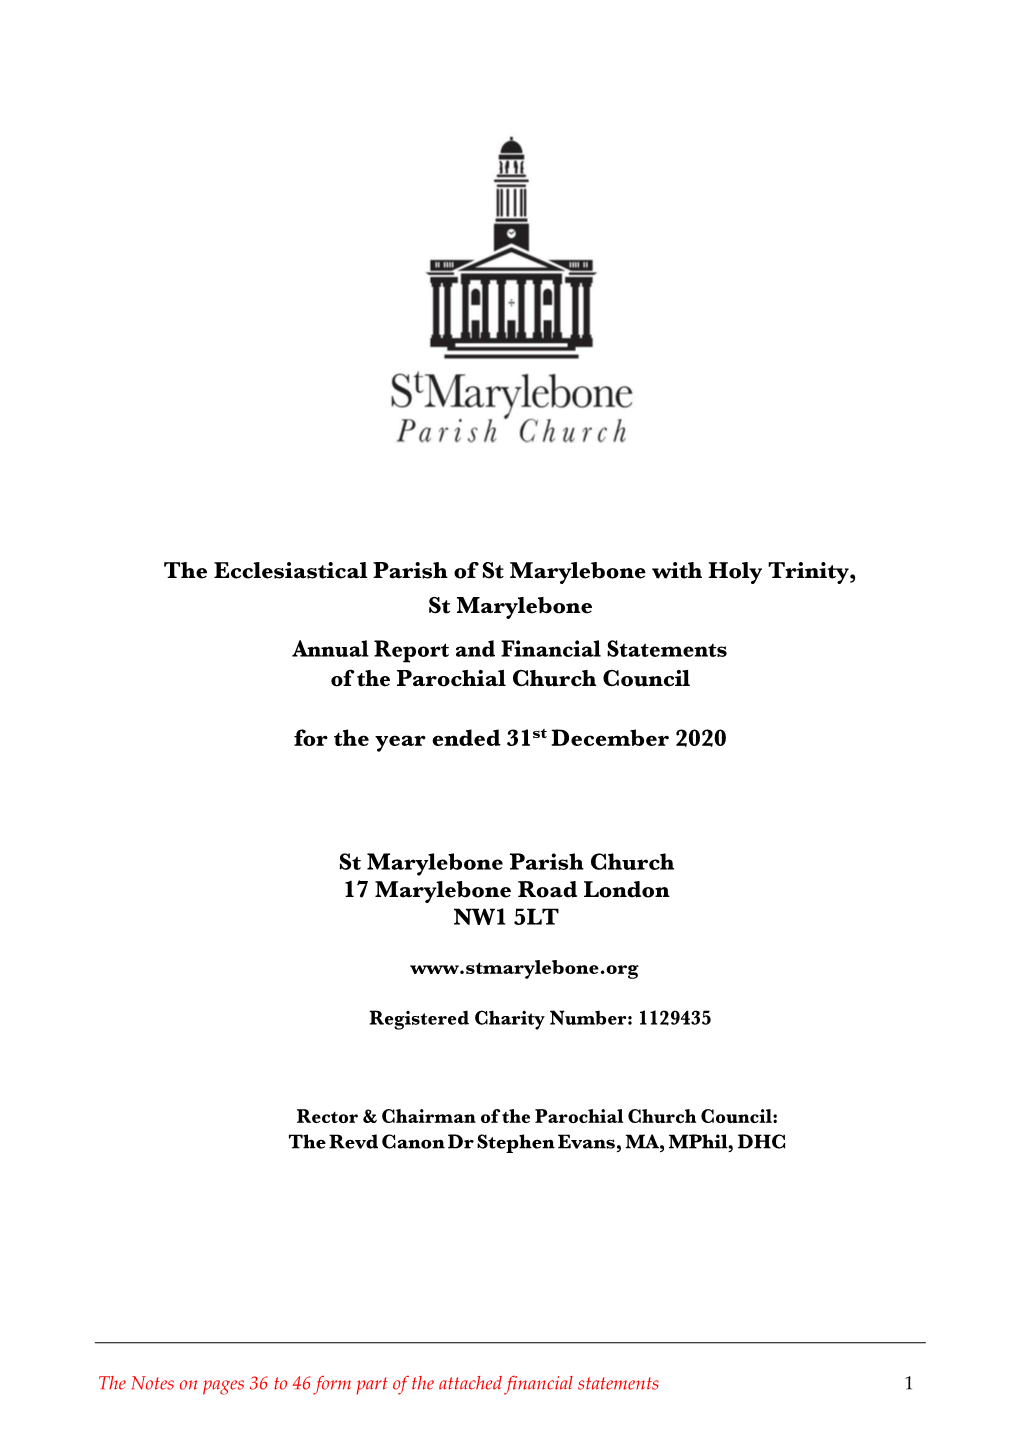 The Ecclesiastical Parish of St Marylebone with Holy Trinity, St Marylebone Annual Report and Financial Statements of the Parochial Church Council